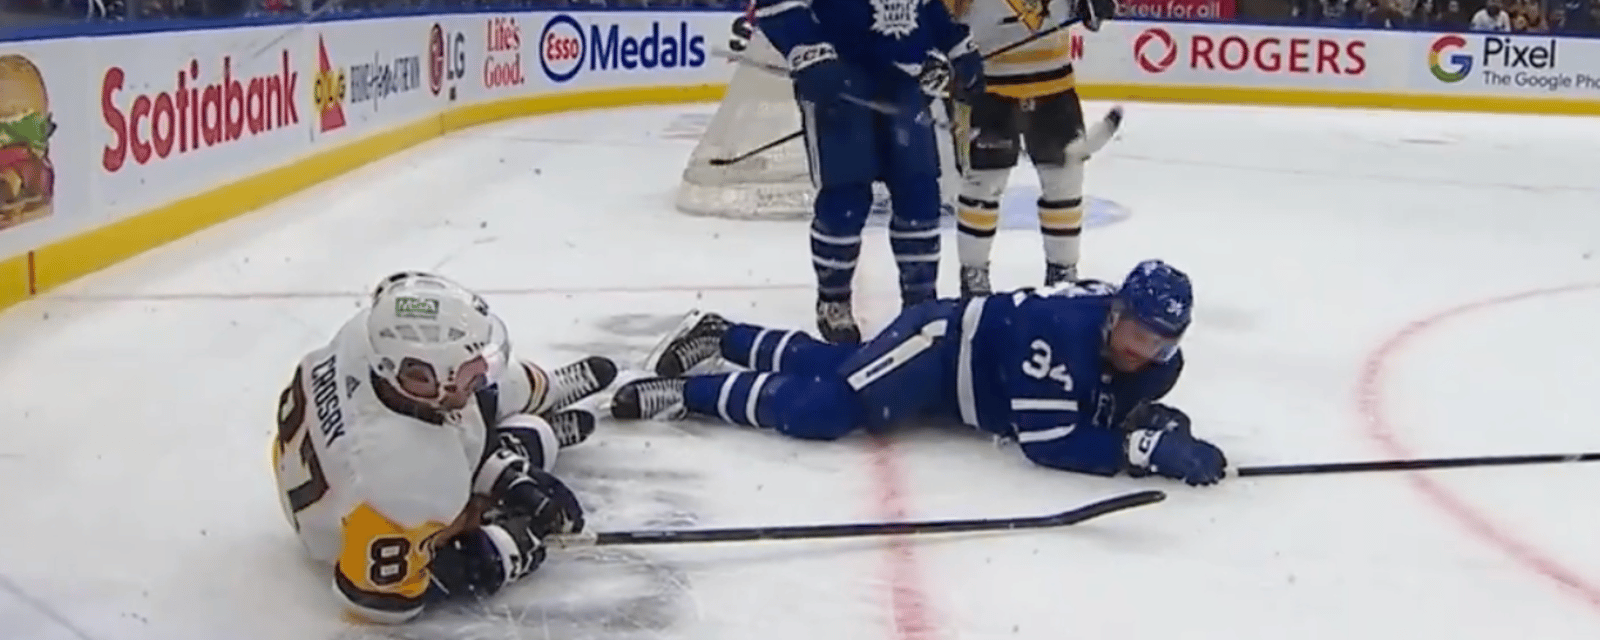 Auston Matthews and Sidney Crosby wreck each other in scary collision 